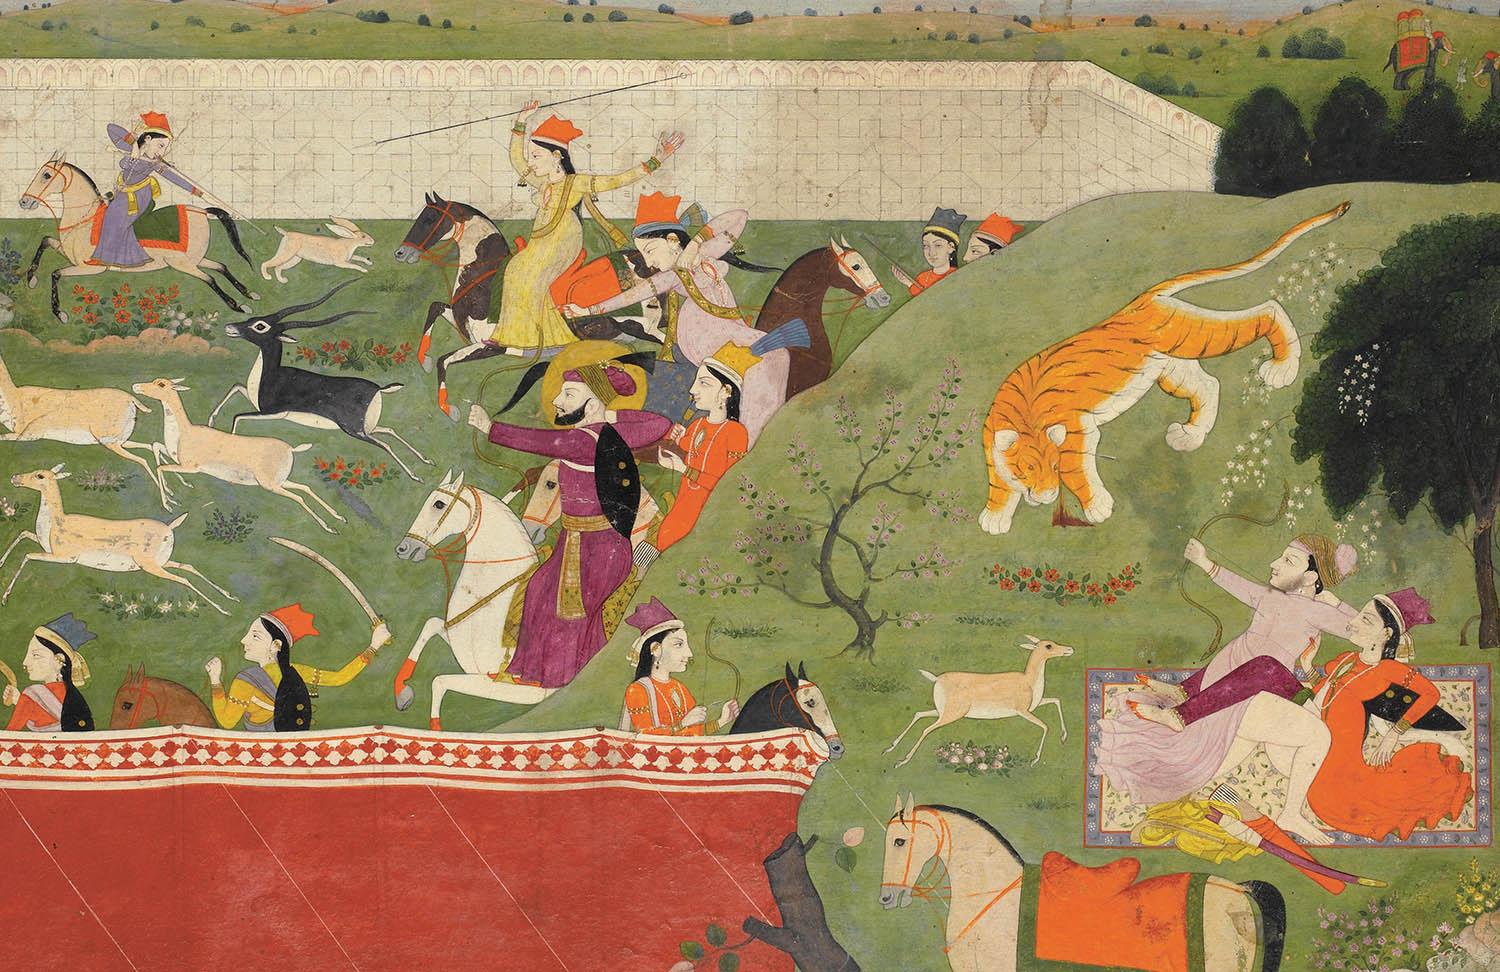  Hunting in the Punjab Hills, India, c.1790.